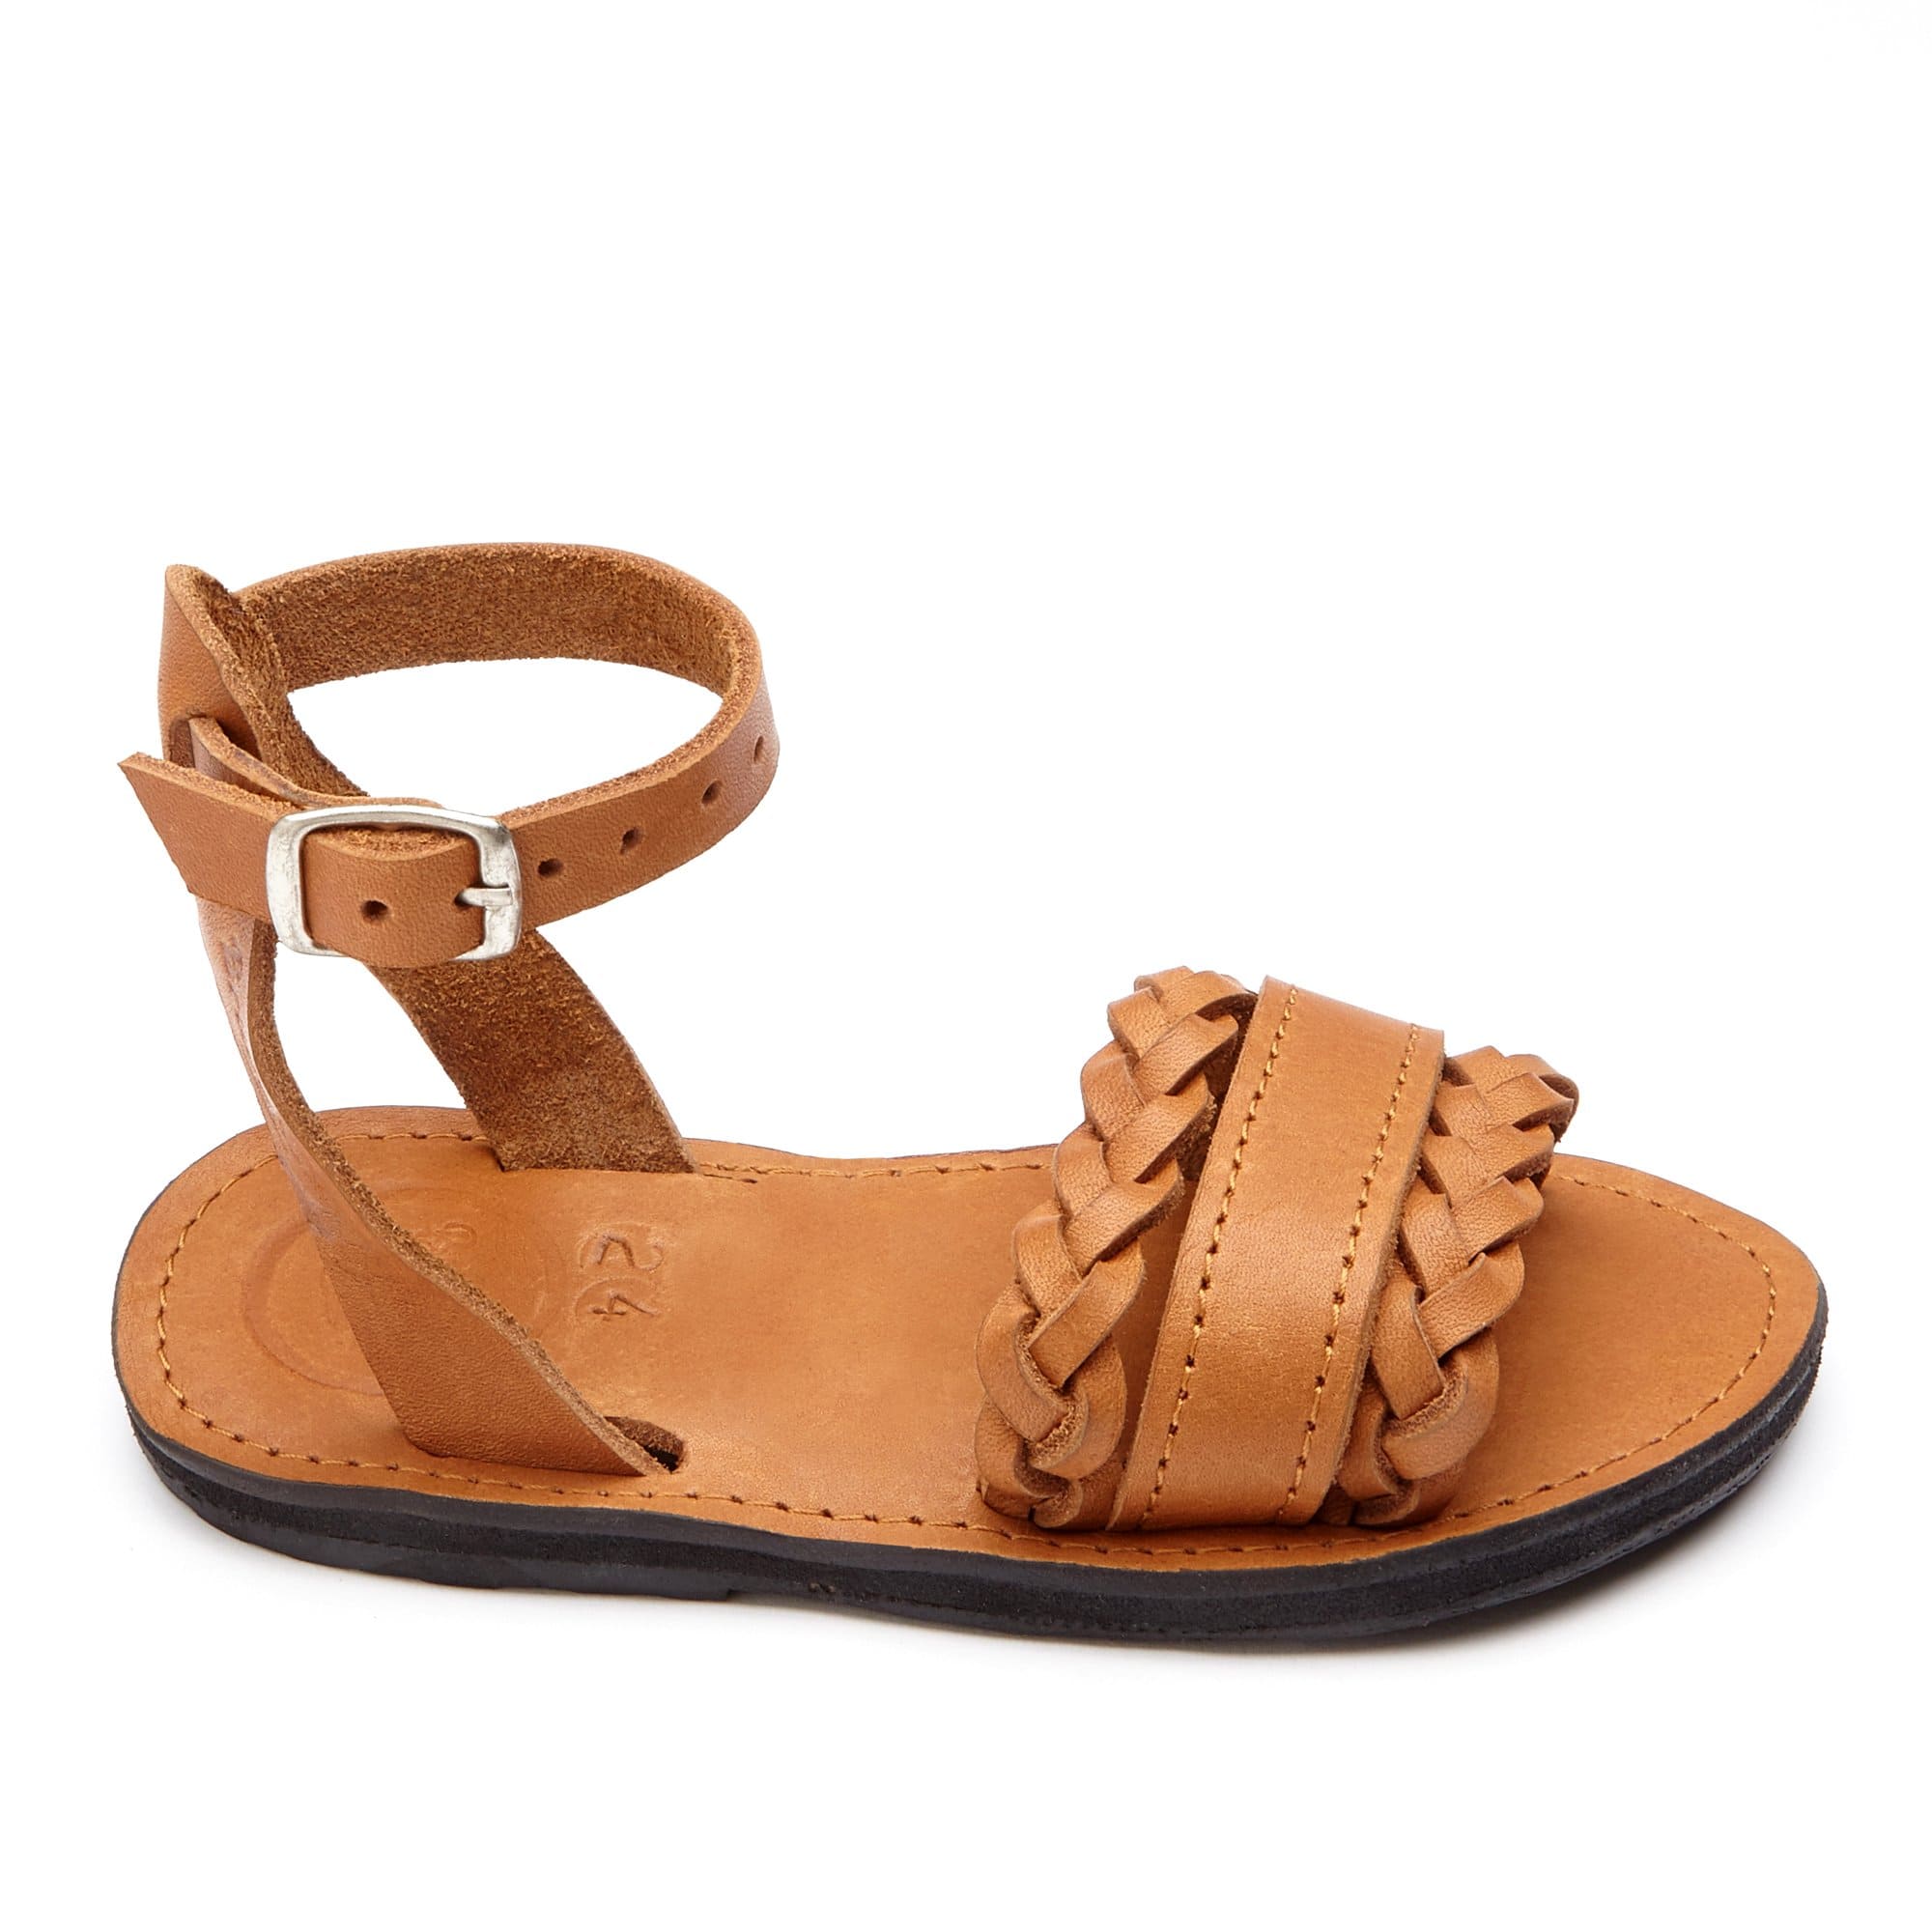 The Chica Bohemia Girl&#39;s Leather Sandal Sandals Brave Soles 